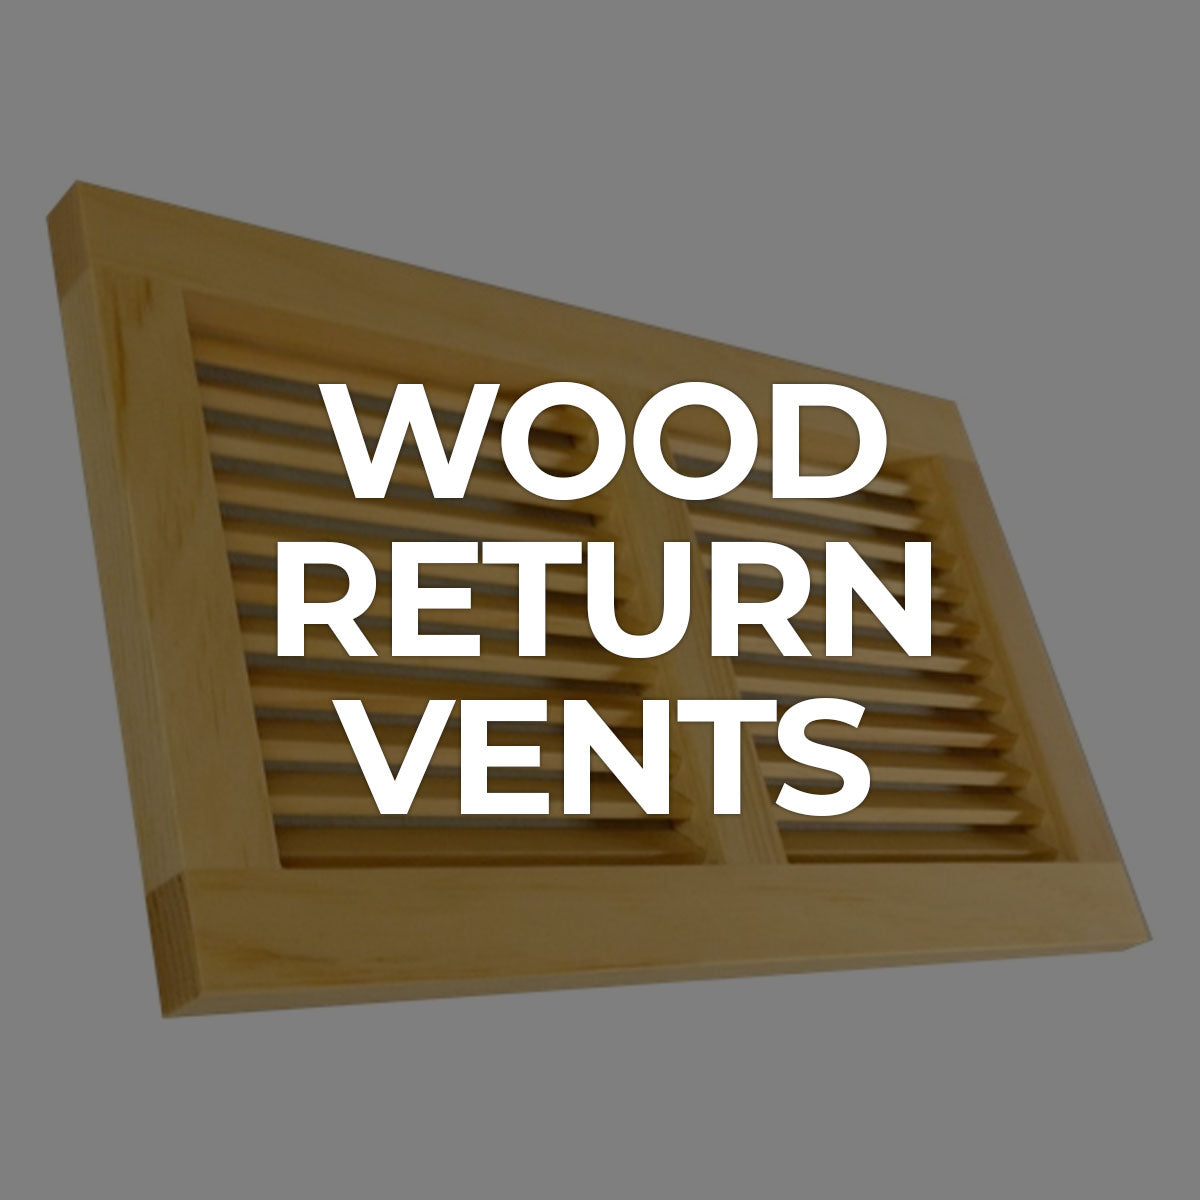 Search by Collections: Wood Return Vents